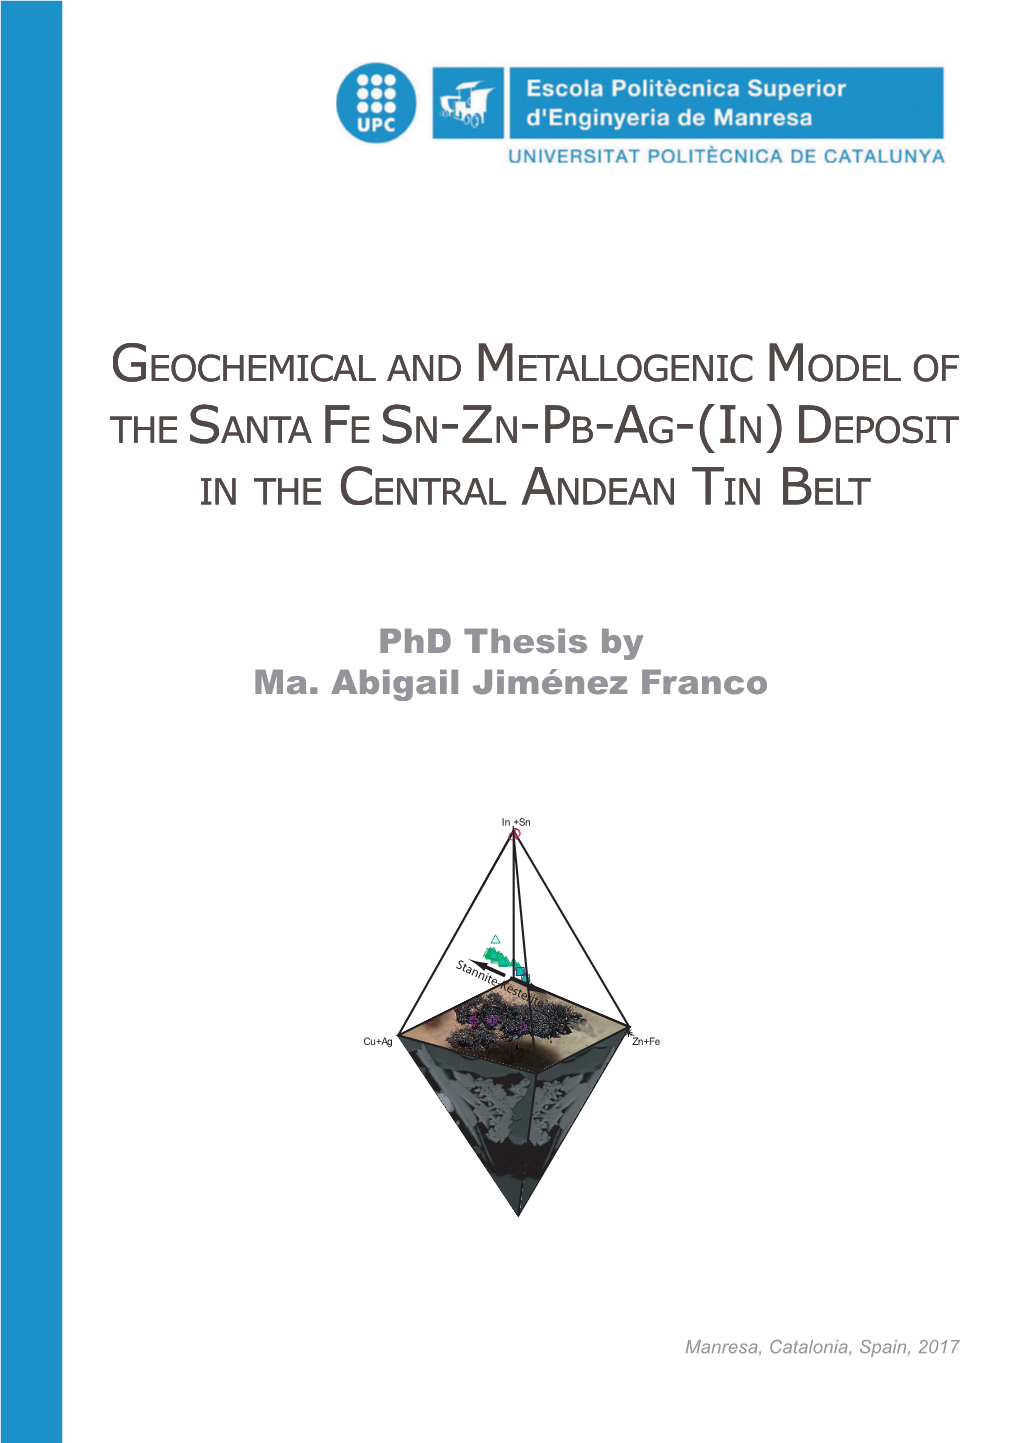 Geochemical and Metallogenic Model of the Santa Fe Sn-Zn-Pb-Ag-(In) Deposit in the Central Andean Tin Belt